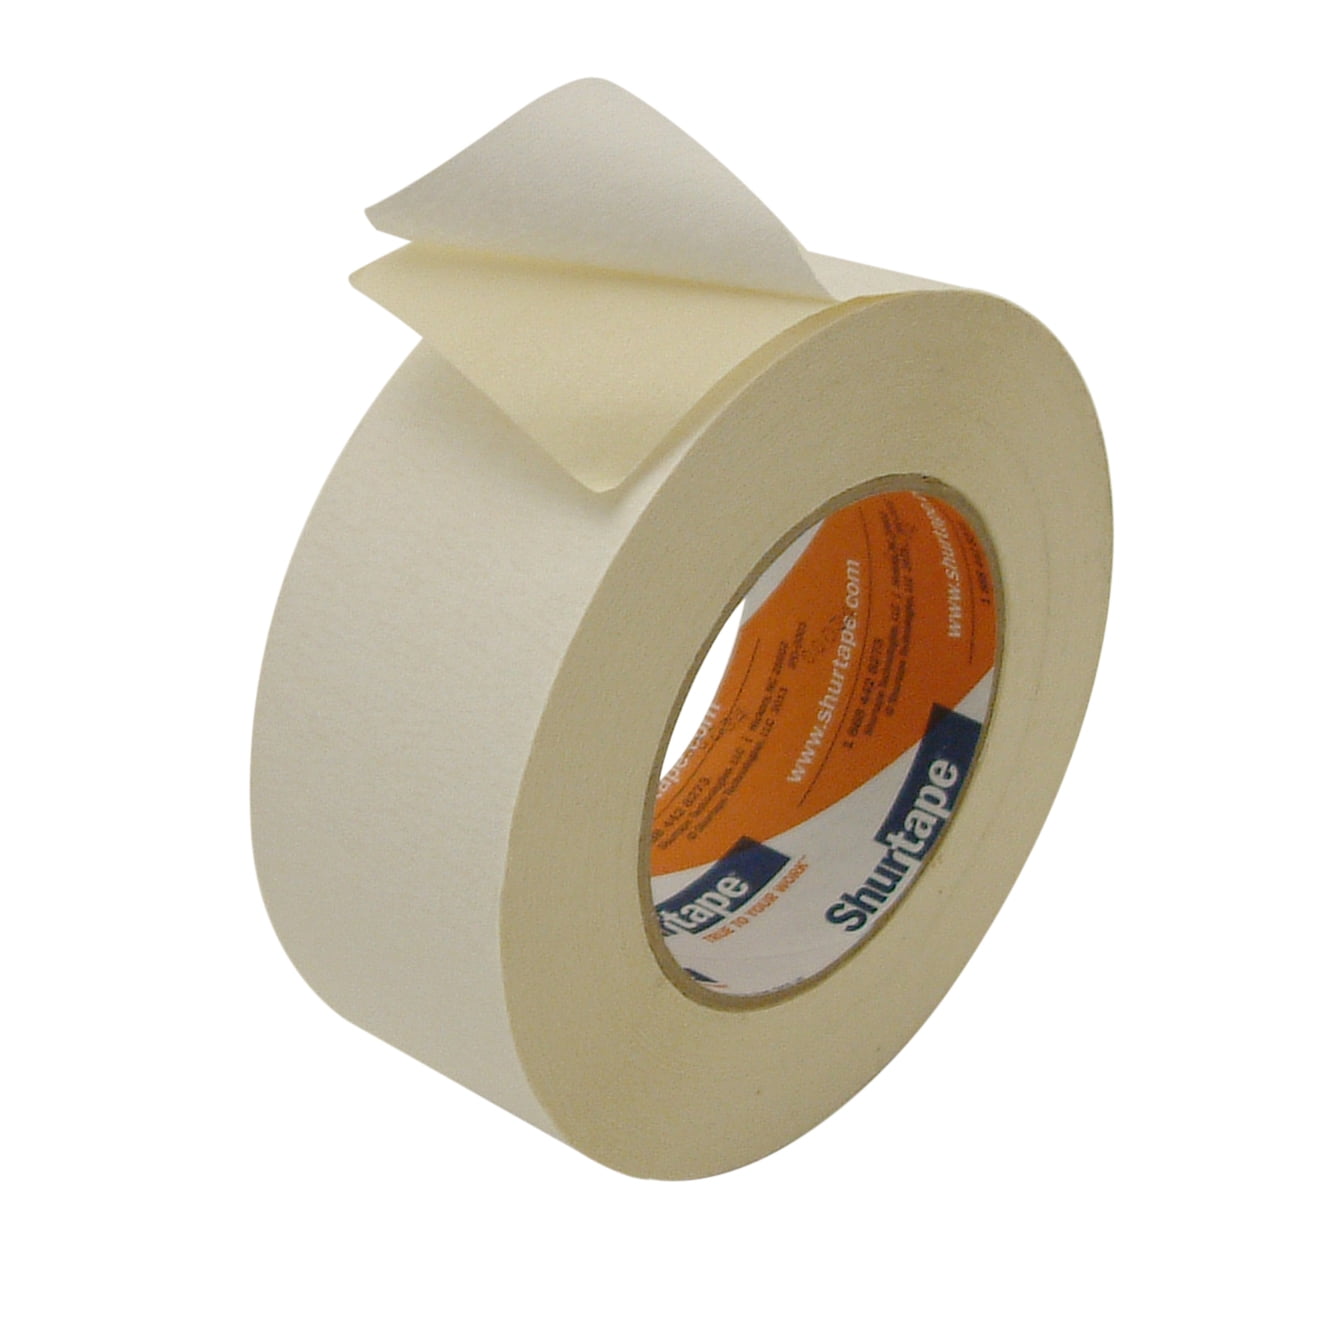 Shurtape GG-200 Double-Sided Crepe Paper Tape: 2 in x 36 yds. (Natural) 